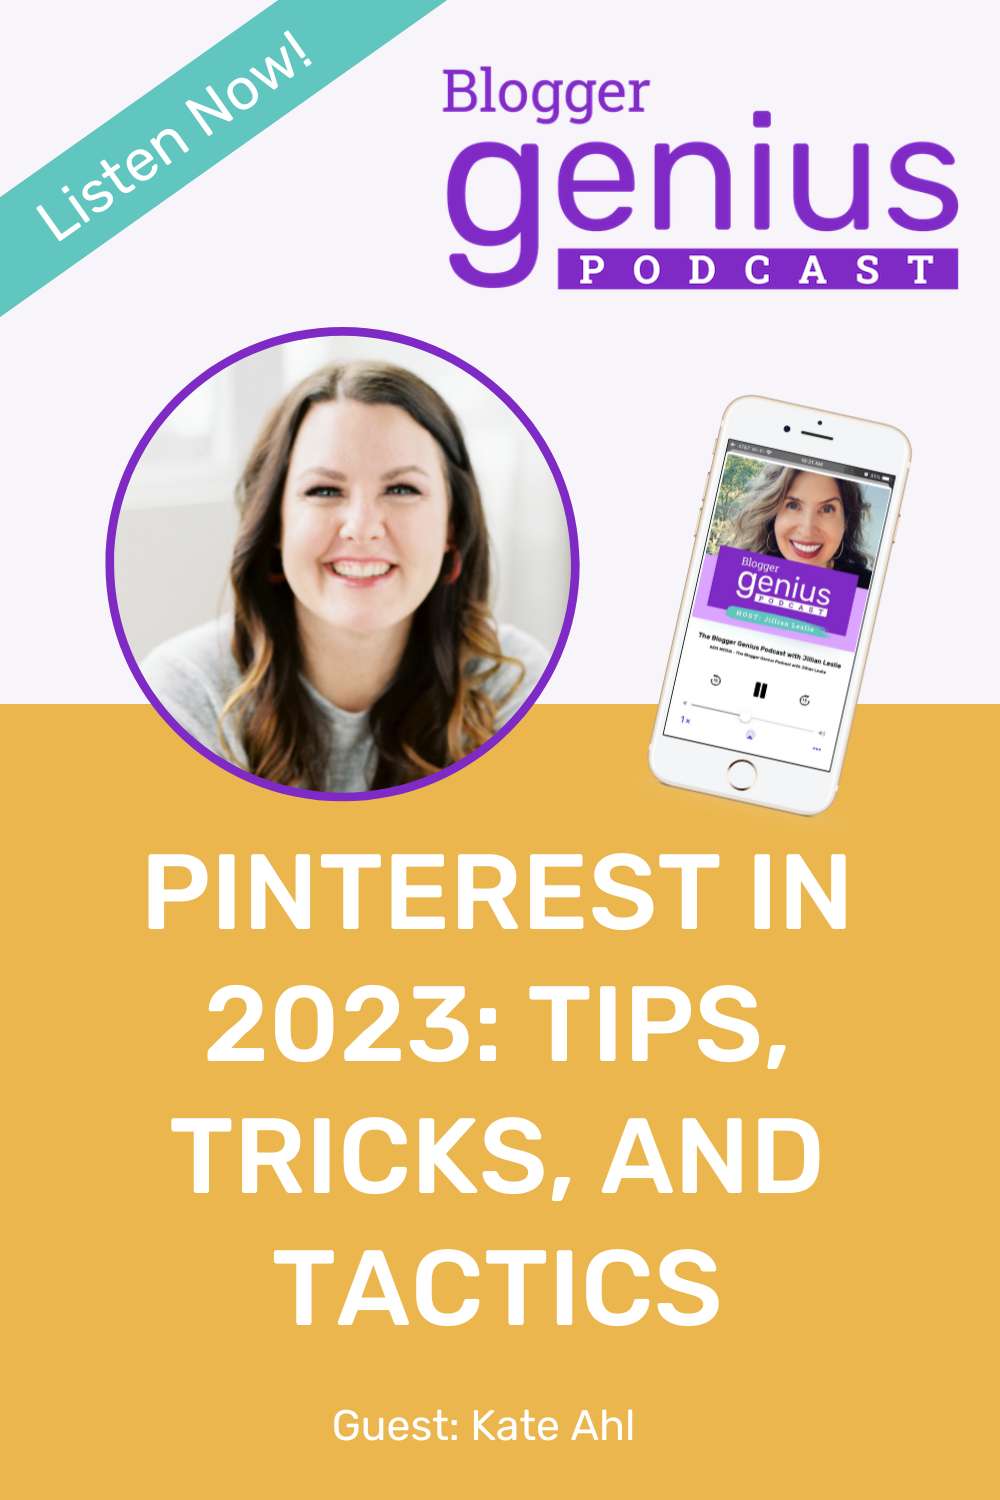 Pinterest in 2023: Tips, Tricks, and Tactics | The Blogger Genius Podcast with Jillian Leslie